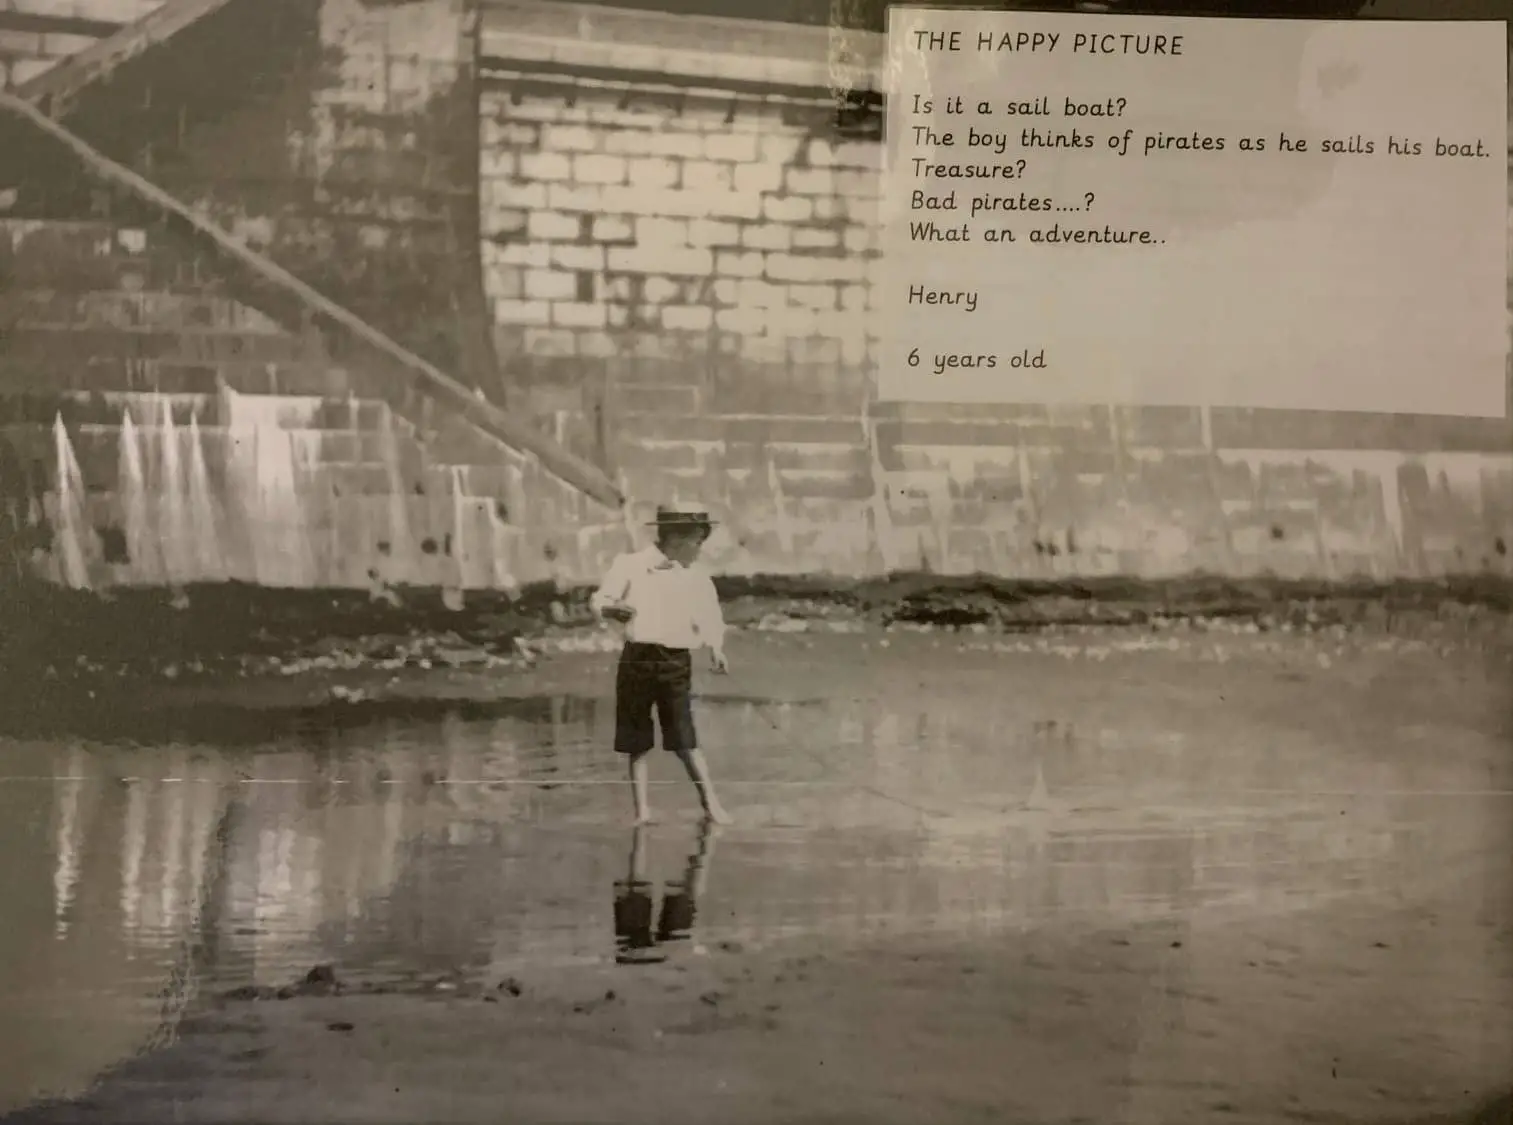 Boy on beach with St. T P Poem overlaid at side